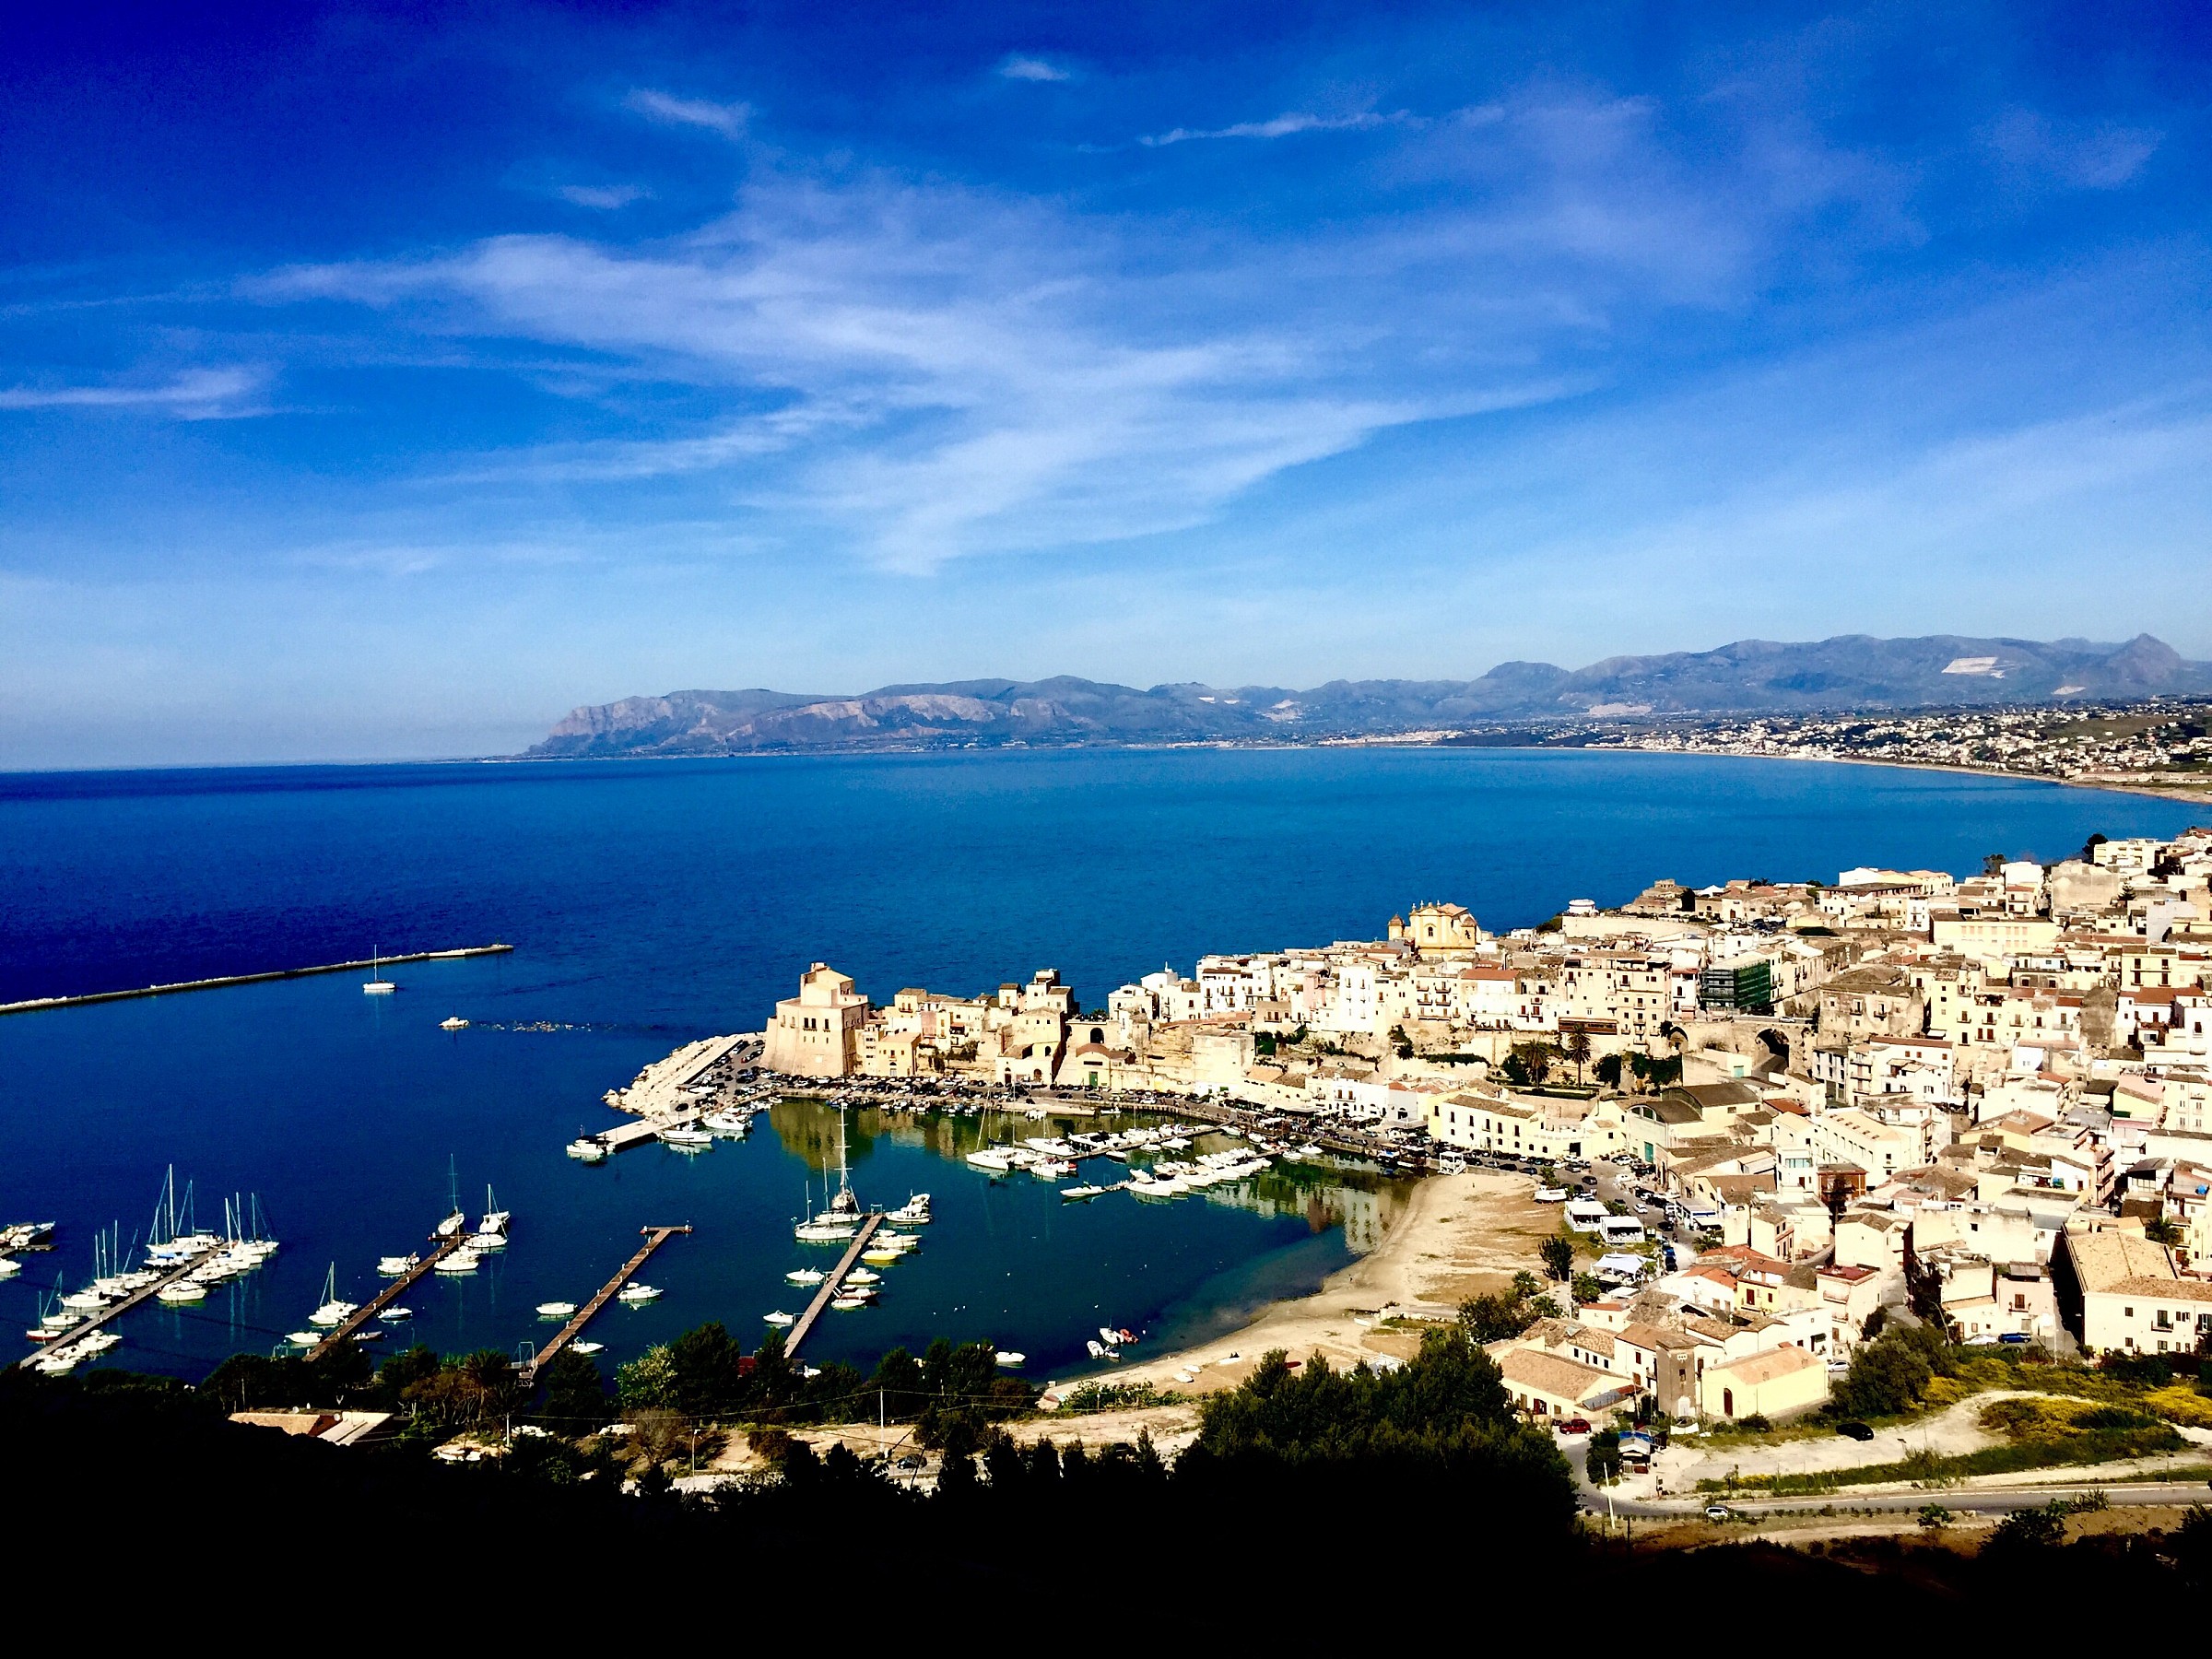 Castellammare del Golfo in the blue painted blue...